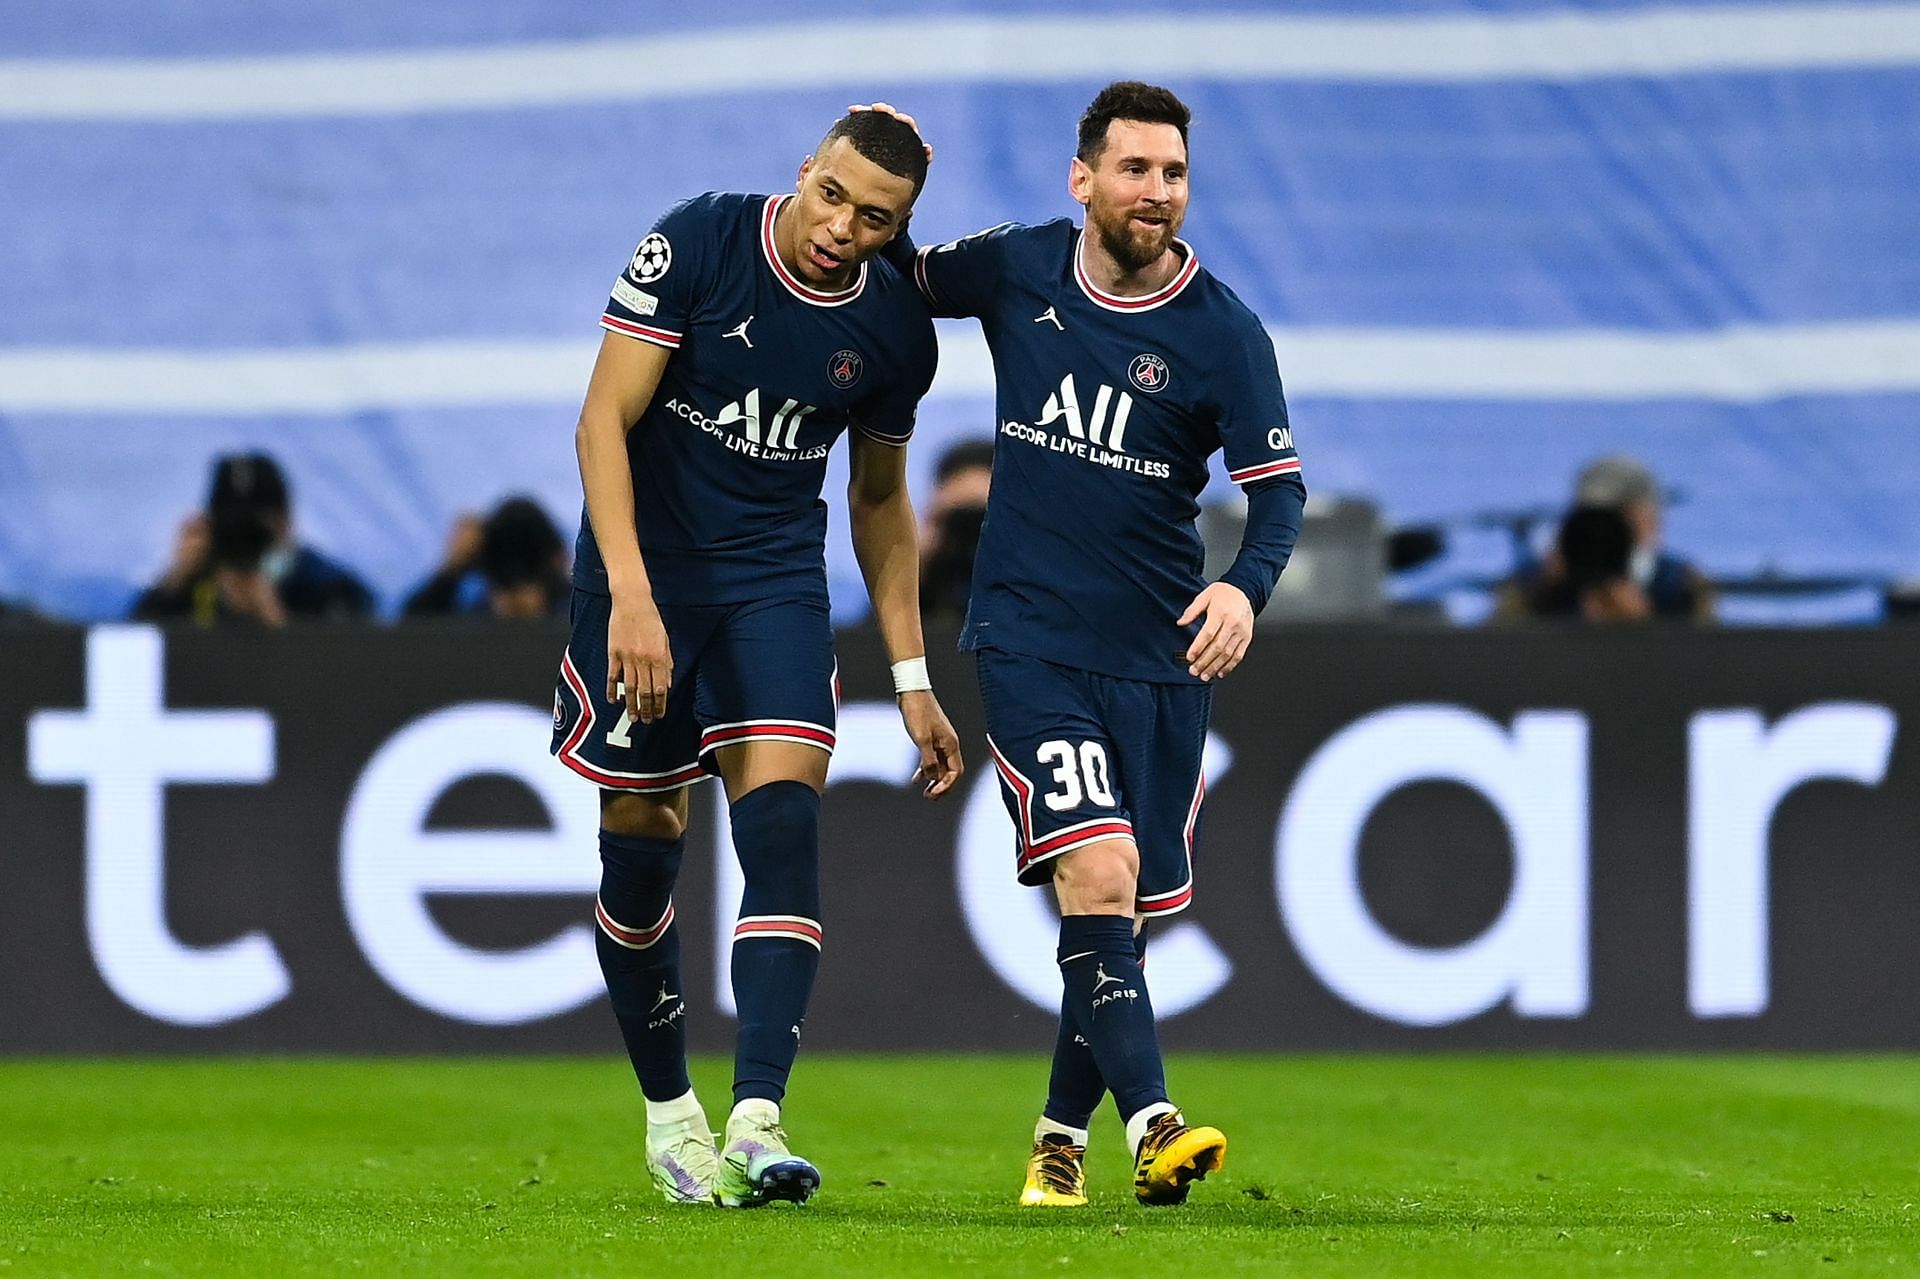 The two PSG stars seem to be having issues